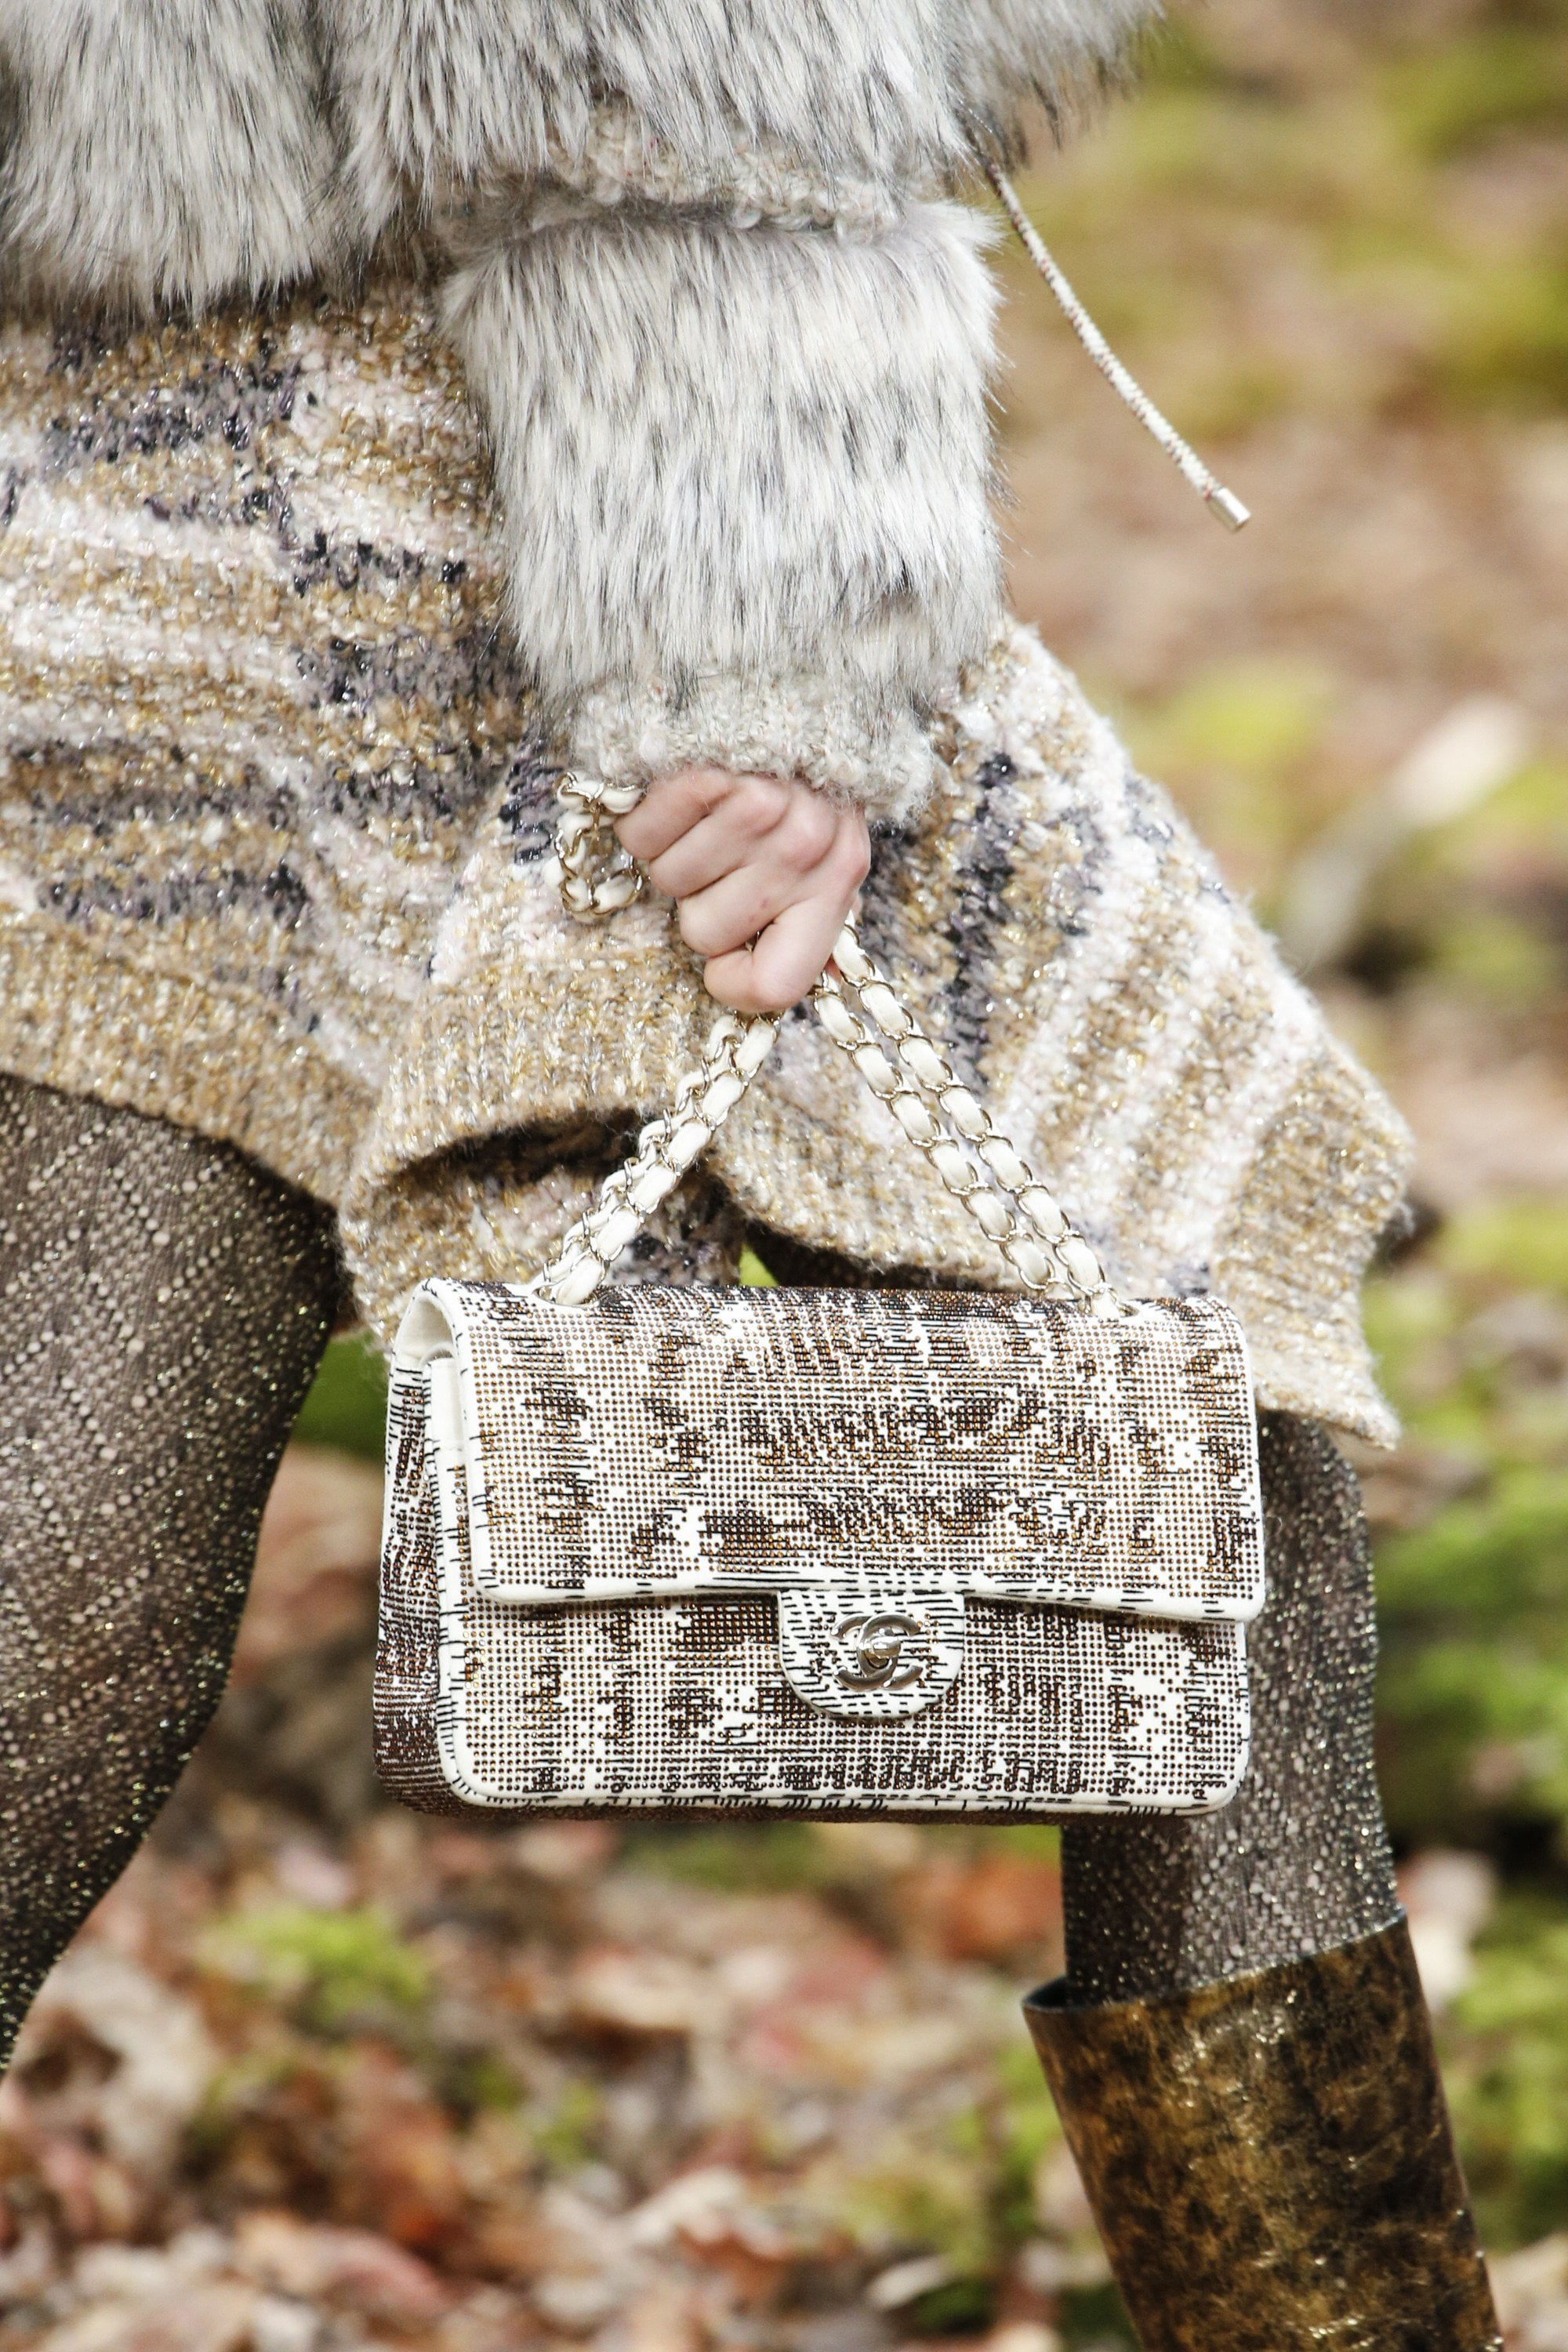 Did You See the New Chanel 31 Bag for Fall 2018?